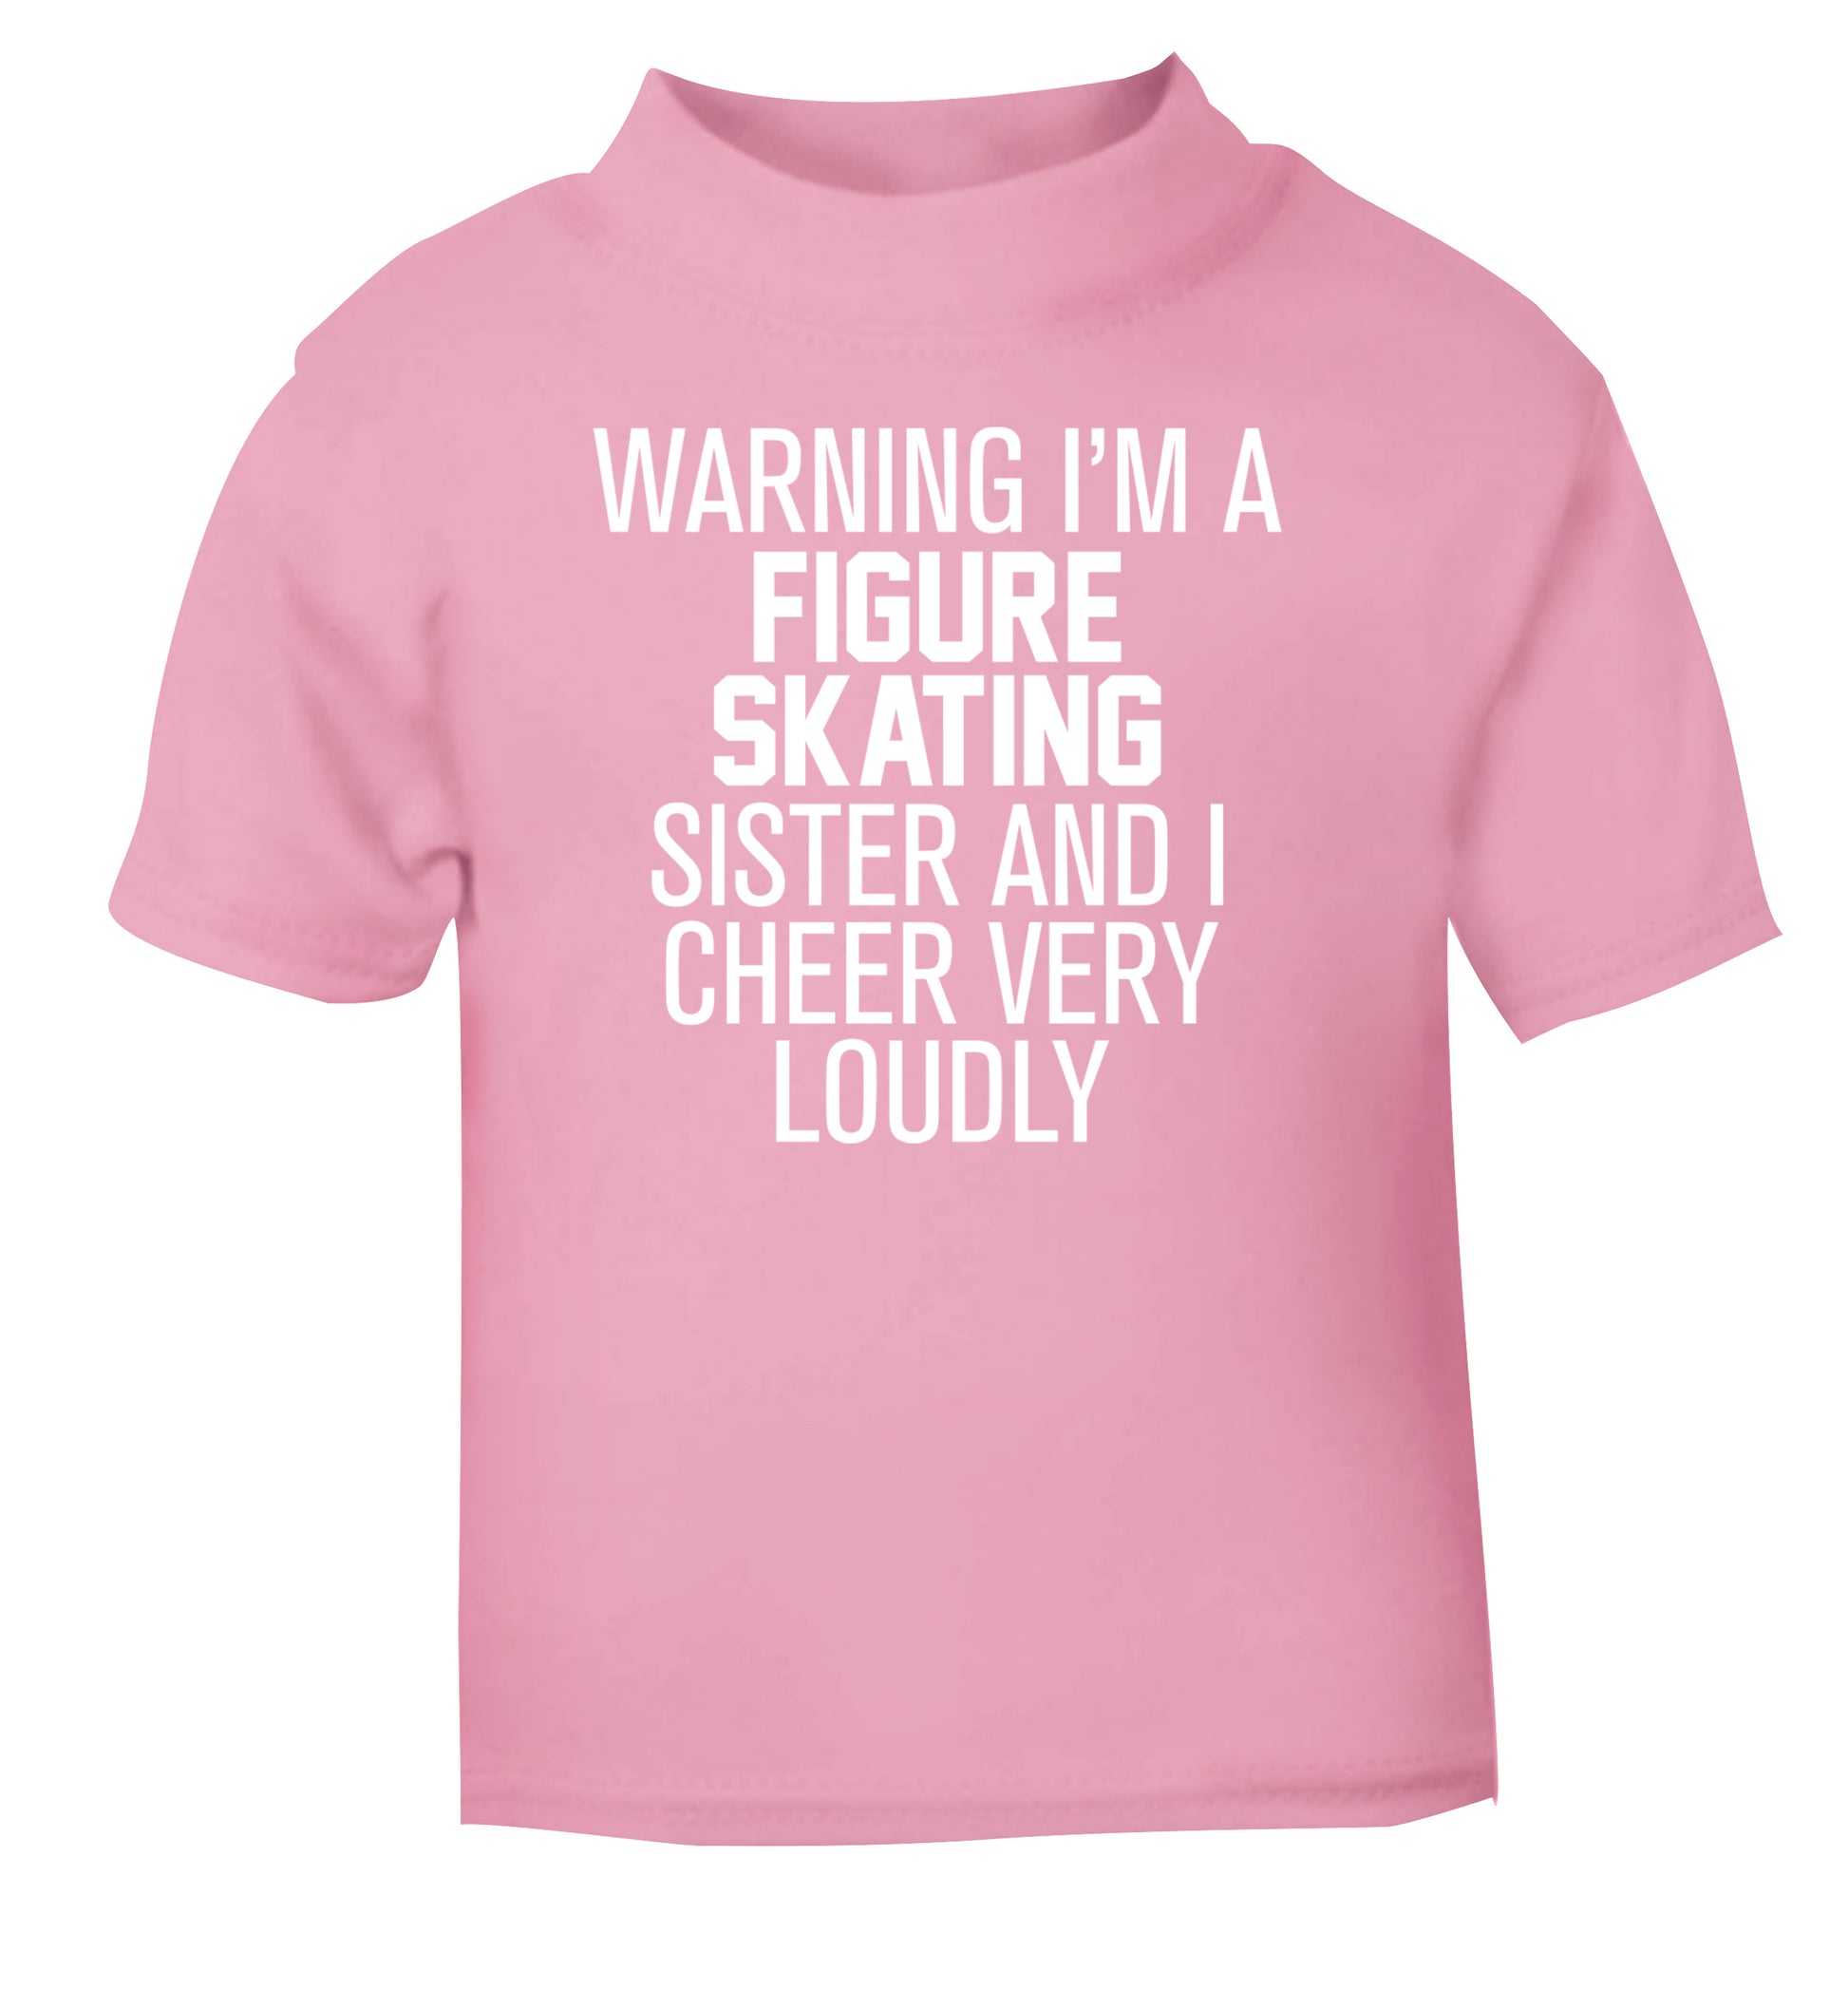 Warning I'm a figure skating sister and I cheer very loudly light pink Baby Toddler Tshirt 2 Years